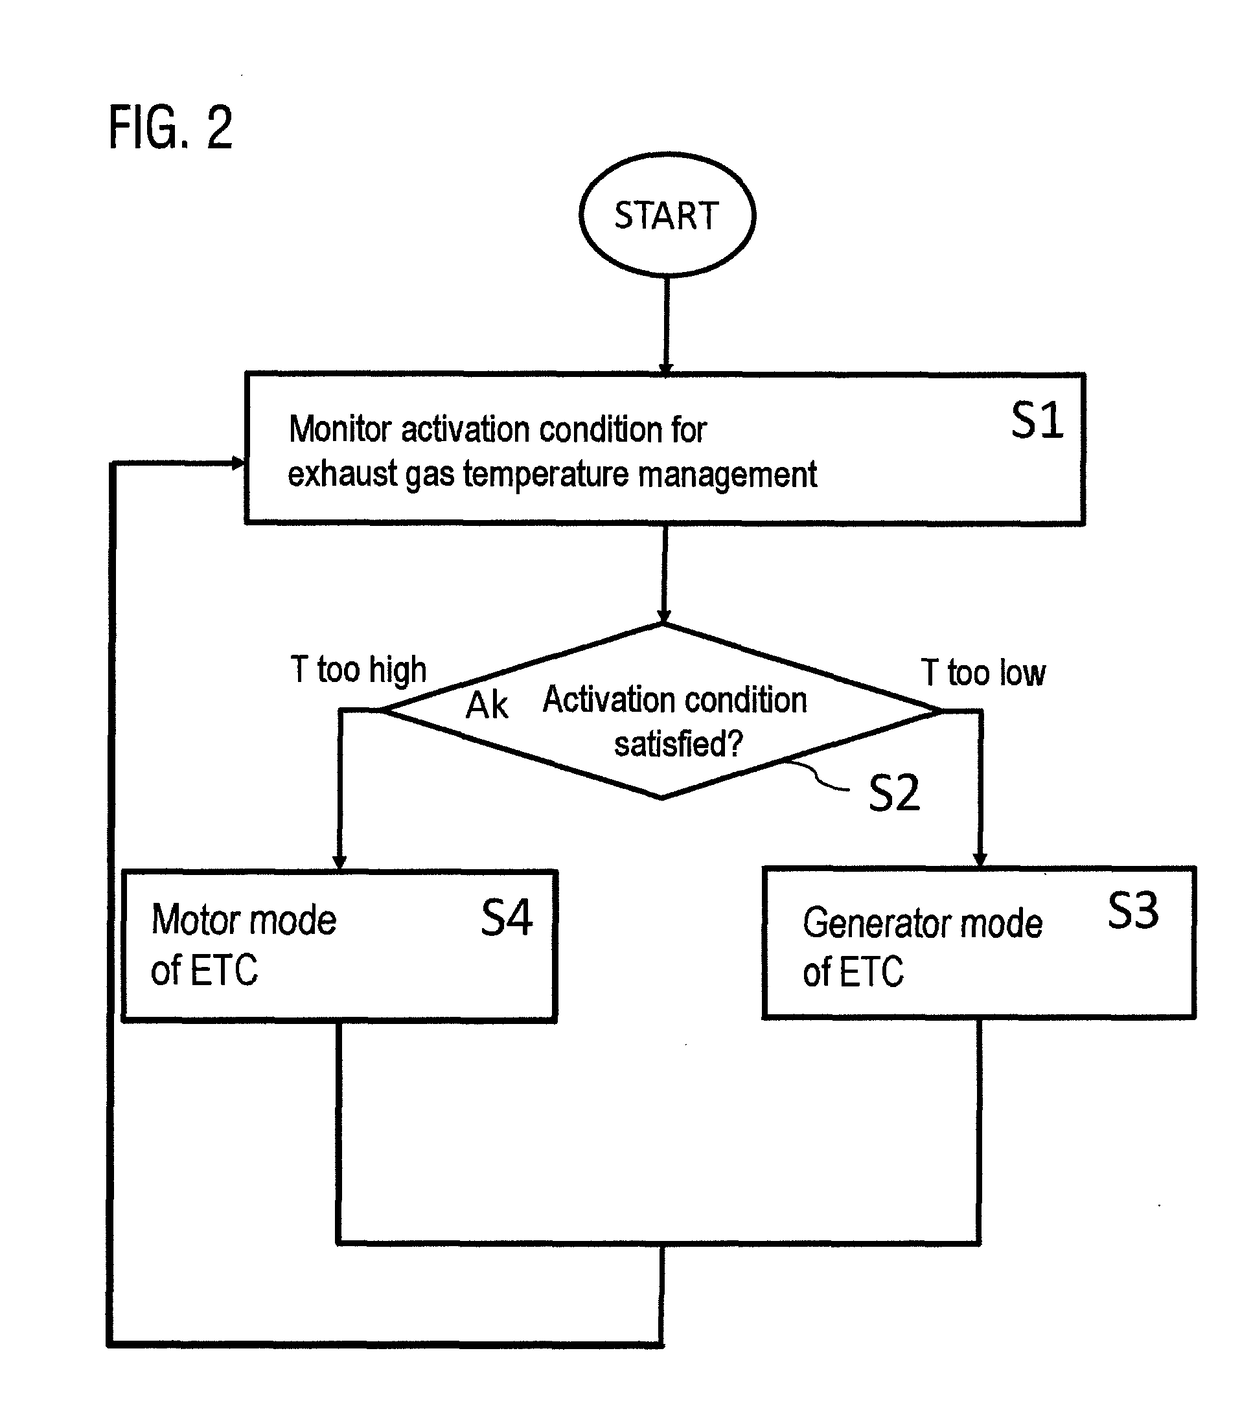 Method and device for raising and/or lowering an exhaust gas temperature of a combustion engine having an exhaust gas aftertreatment device arranged in an exhaust line